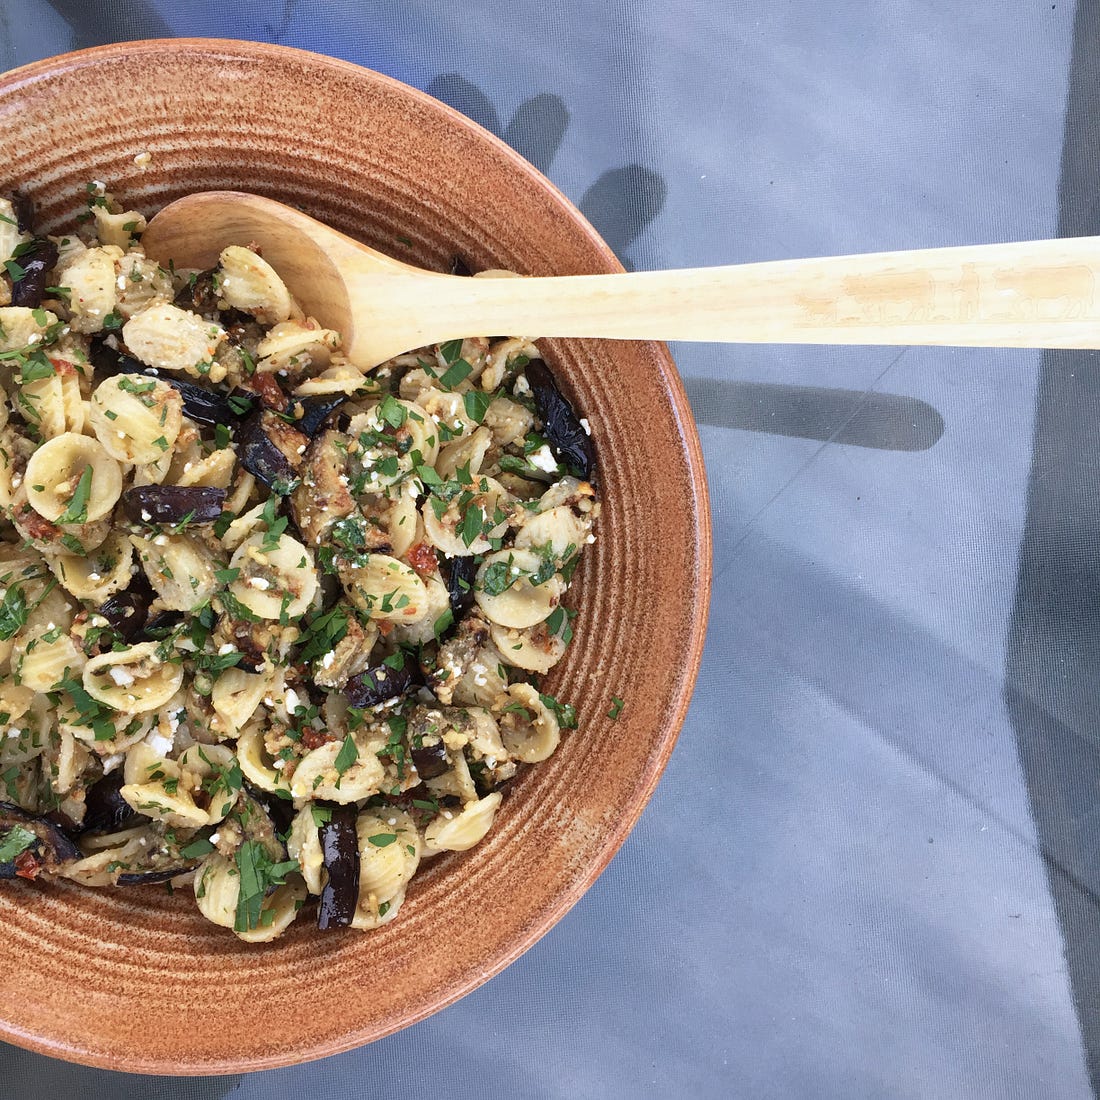 a textured brown ceramic serving bowl filled with orecchiette pasta salad with charred eggplant slices, parsley, sun-dried tomato, and feta visible.